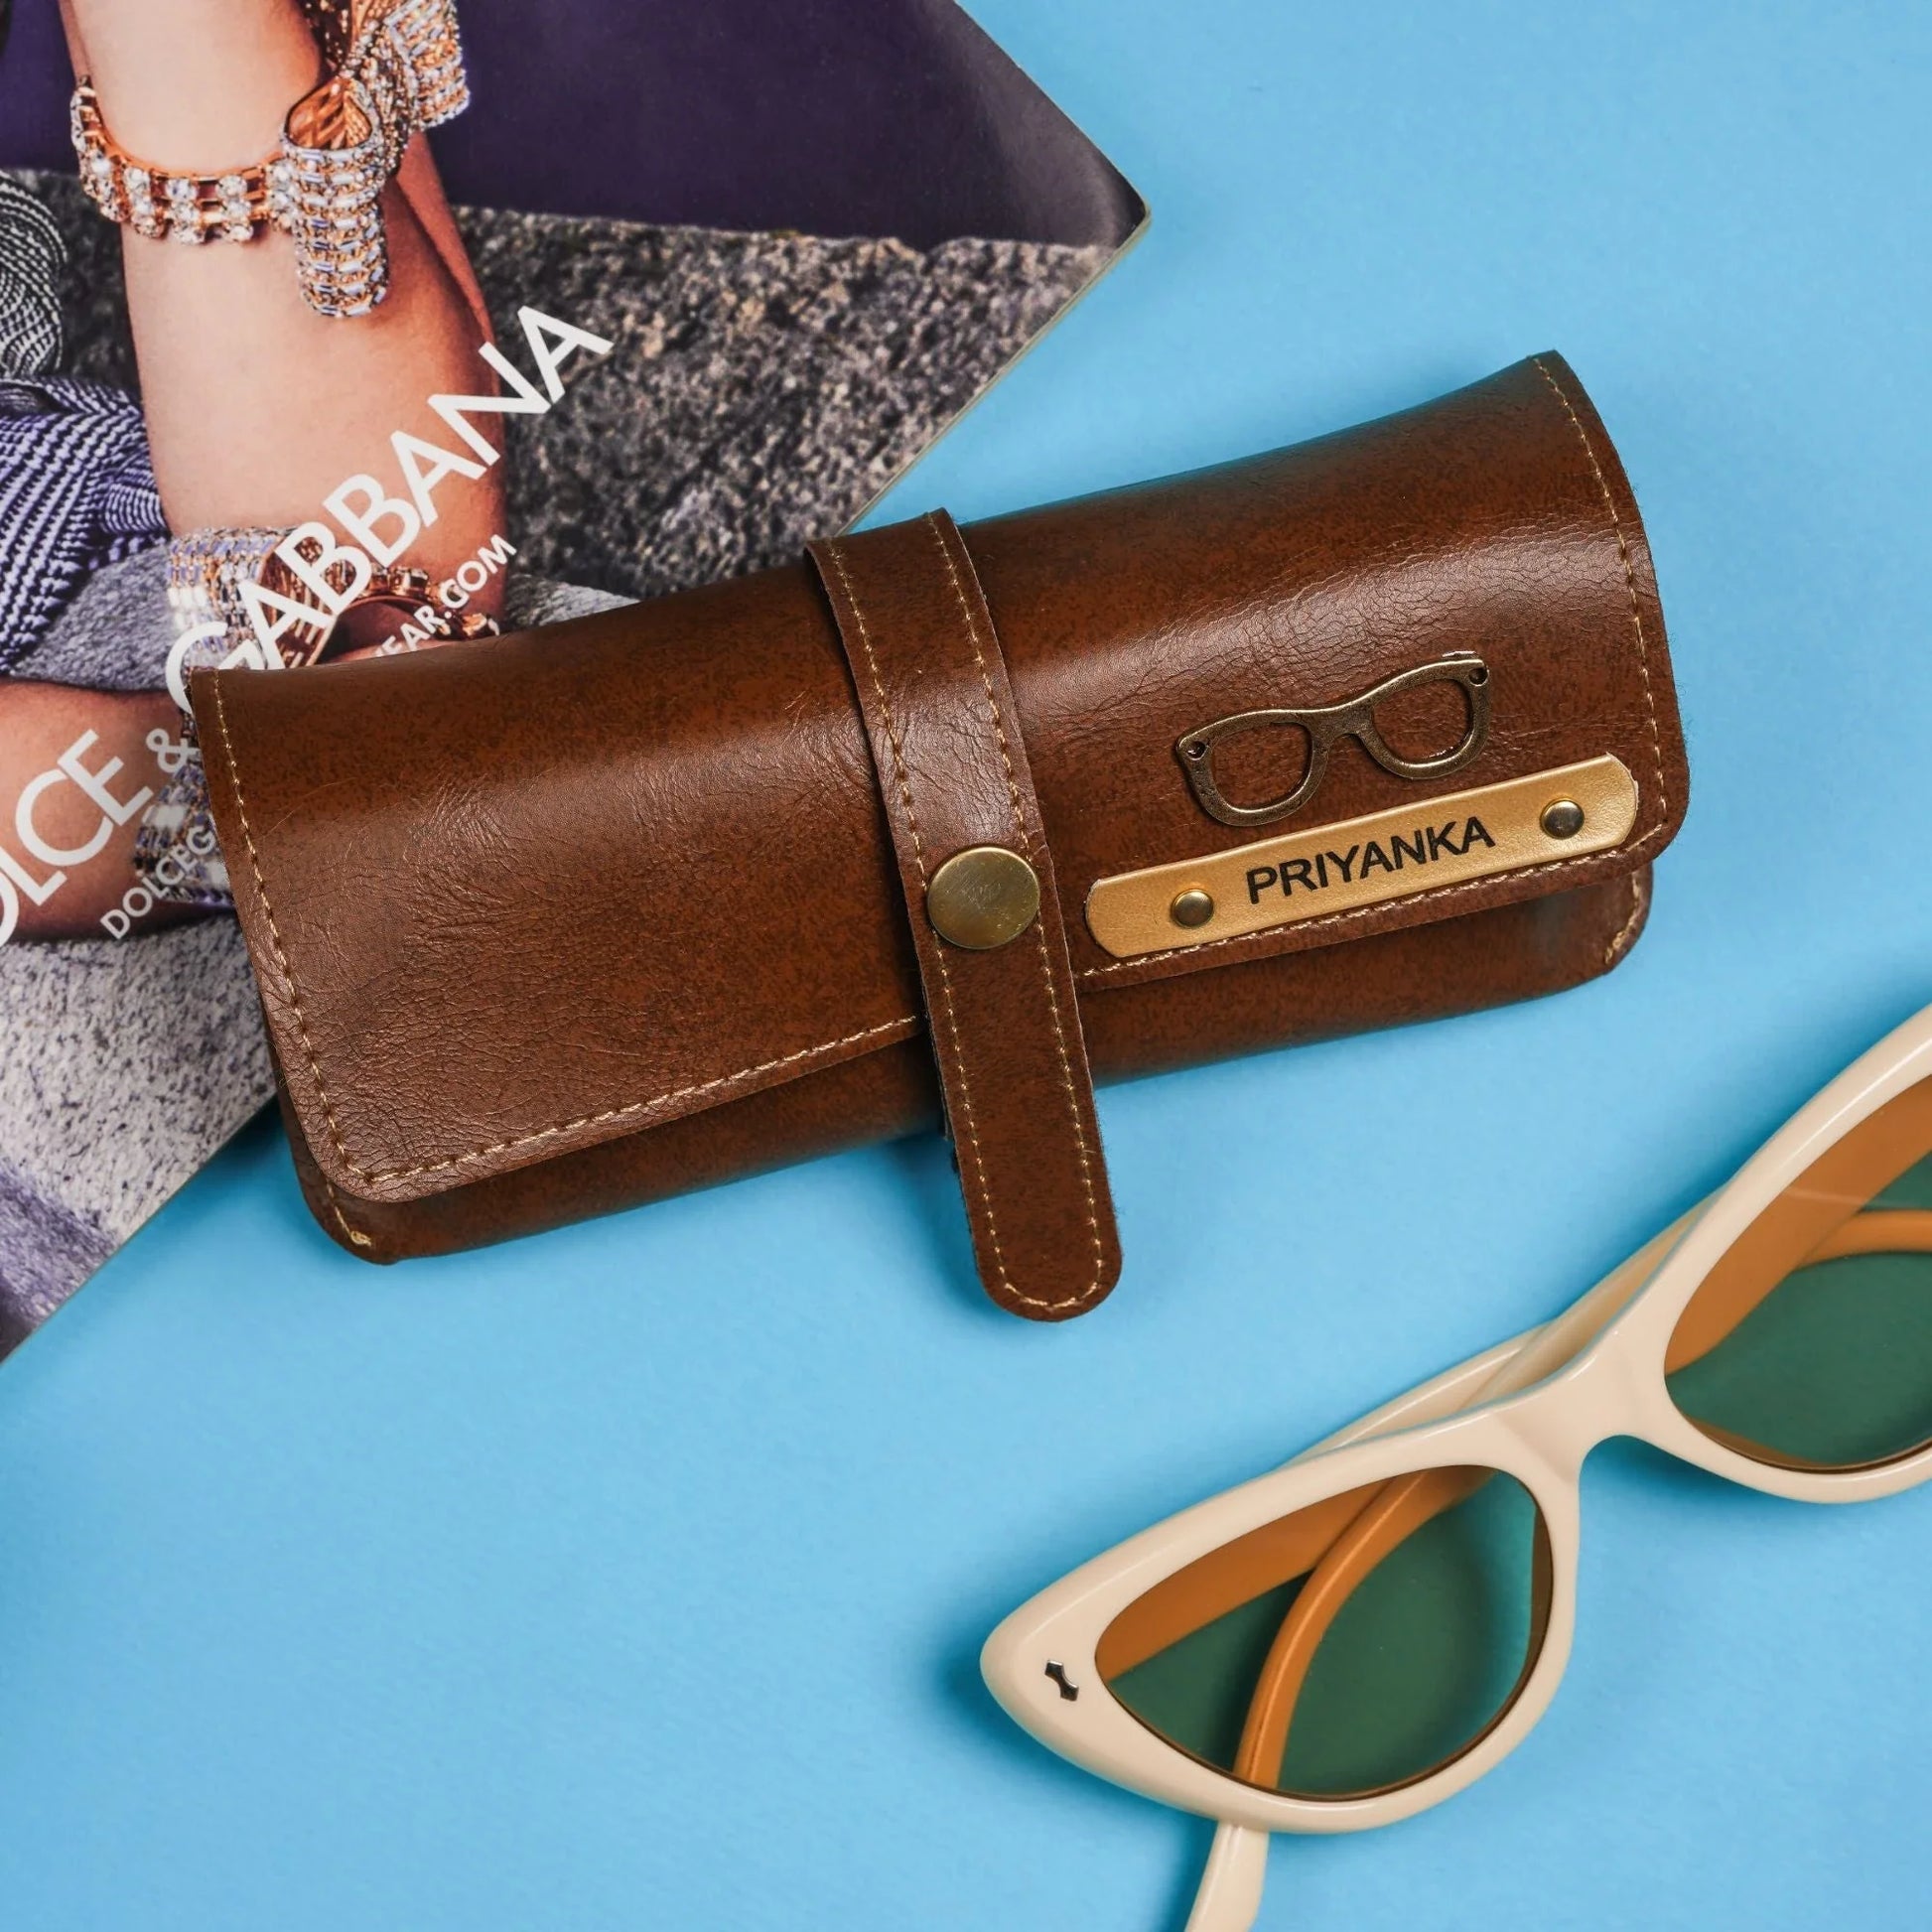 Keep your sunglasses safe and secure with our custom sunglasses case! Featuring a sleek, modern design and made from top-quality materials, this case is the perfect choice for anyone looking for a functional and stylish accessory.